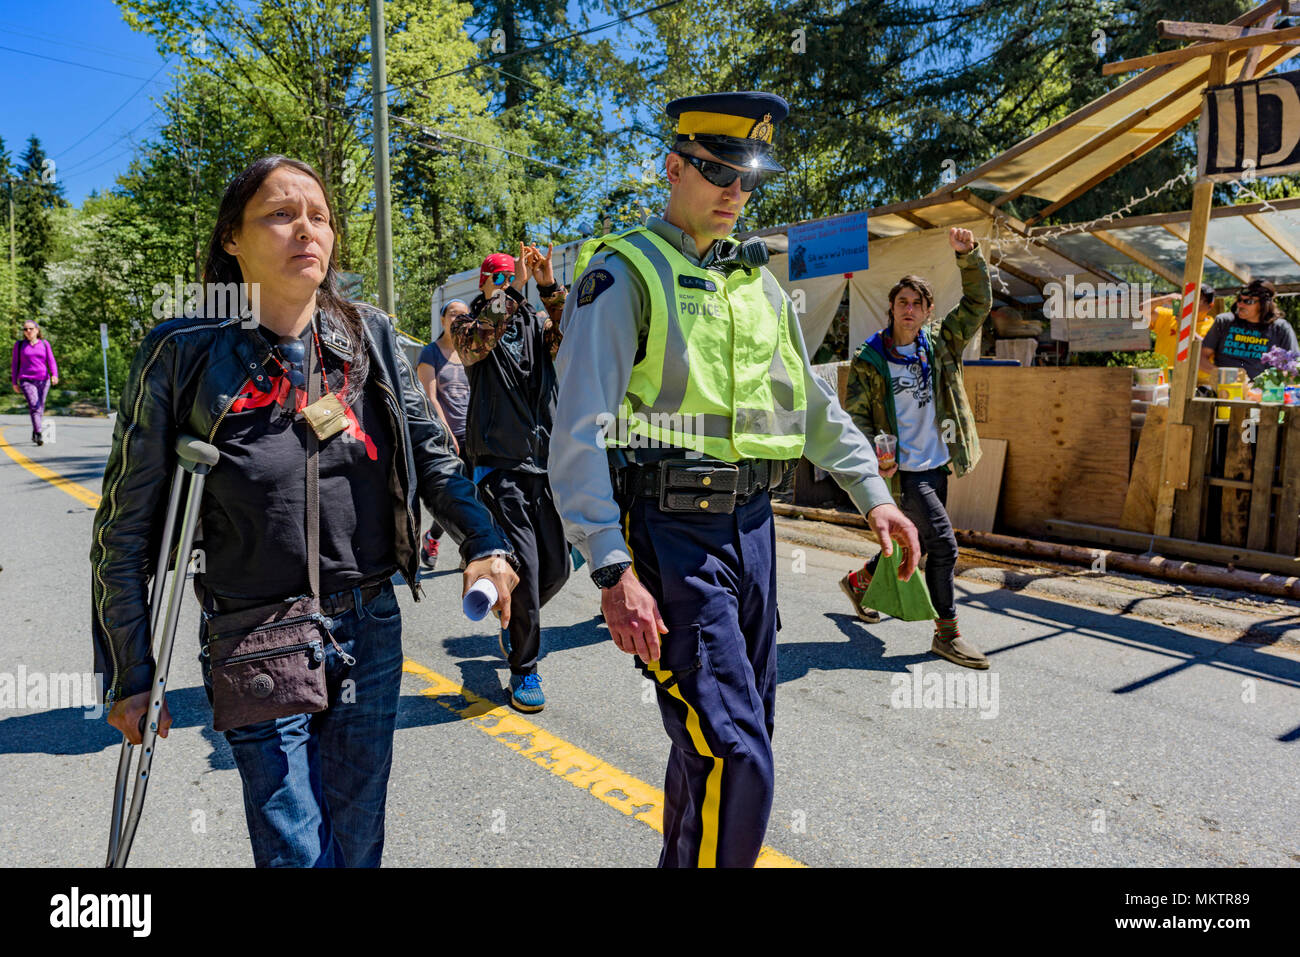 Protester Kat Roivas is arrested for the 3rd time standing against the Kinder Morgan Pipeline twinning and expansion, Burnaby Mountain, British Columb Stock Photo